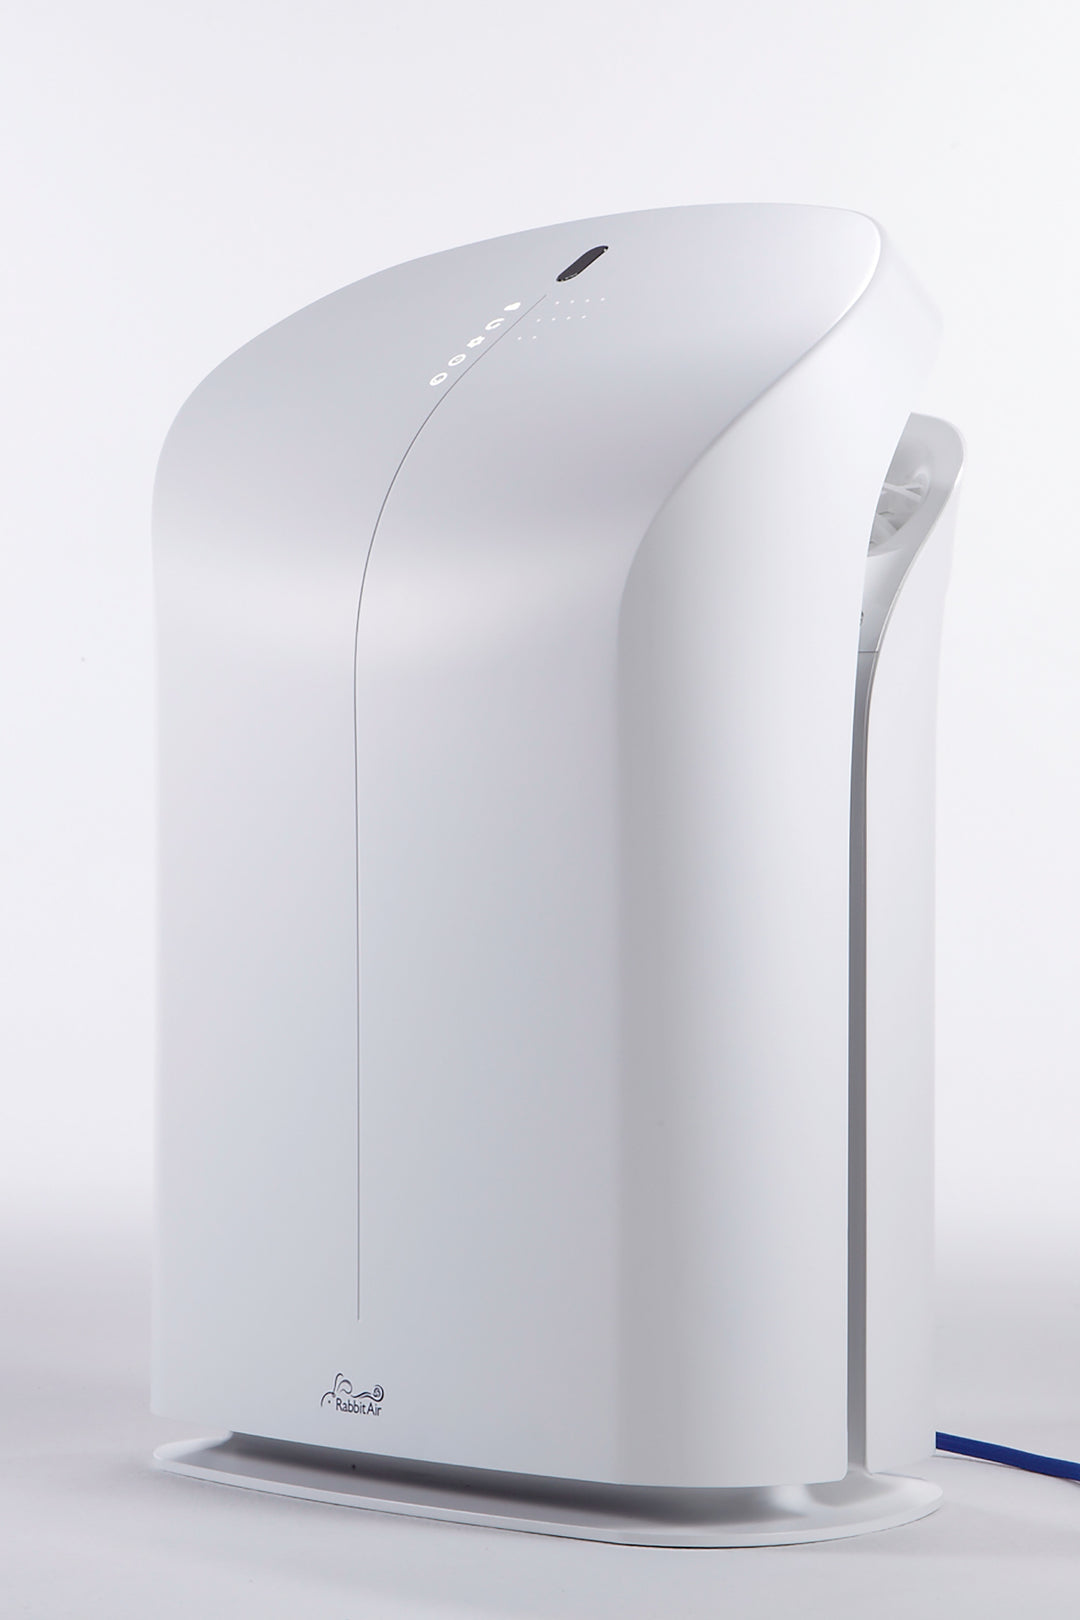 BioGS 2.0 air purifier front side view